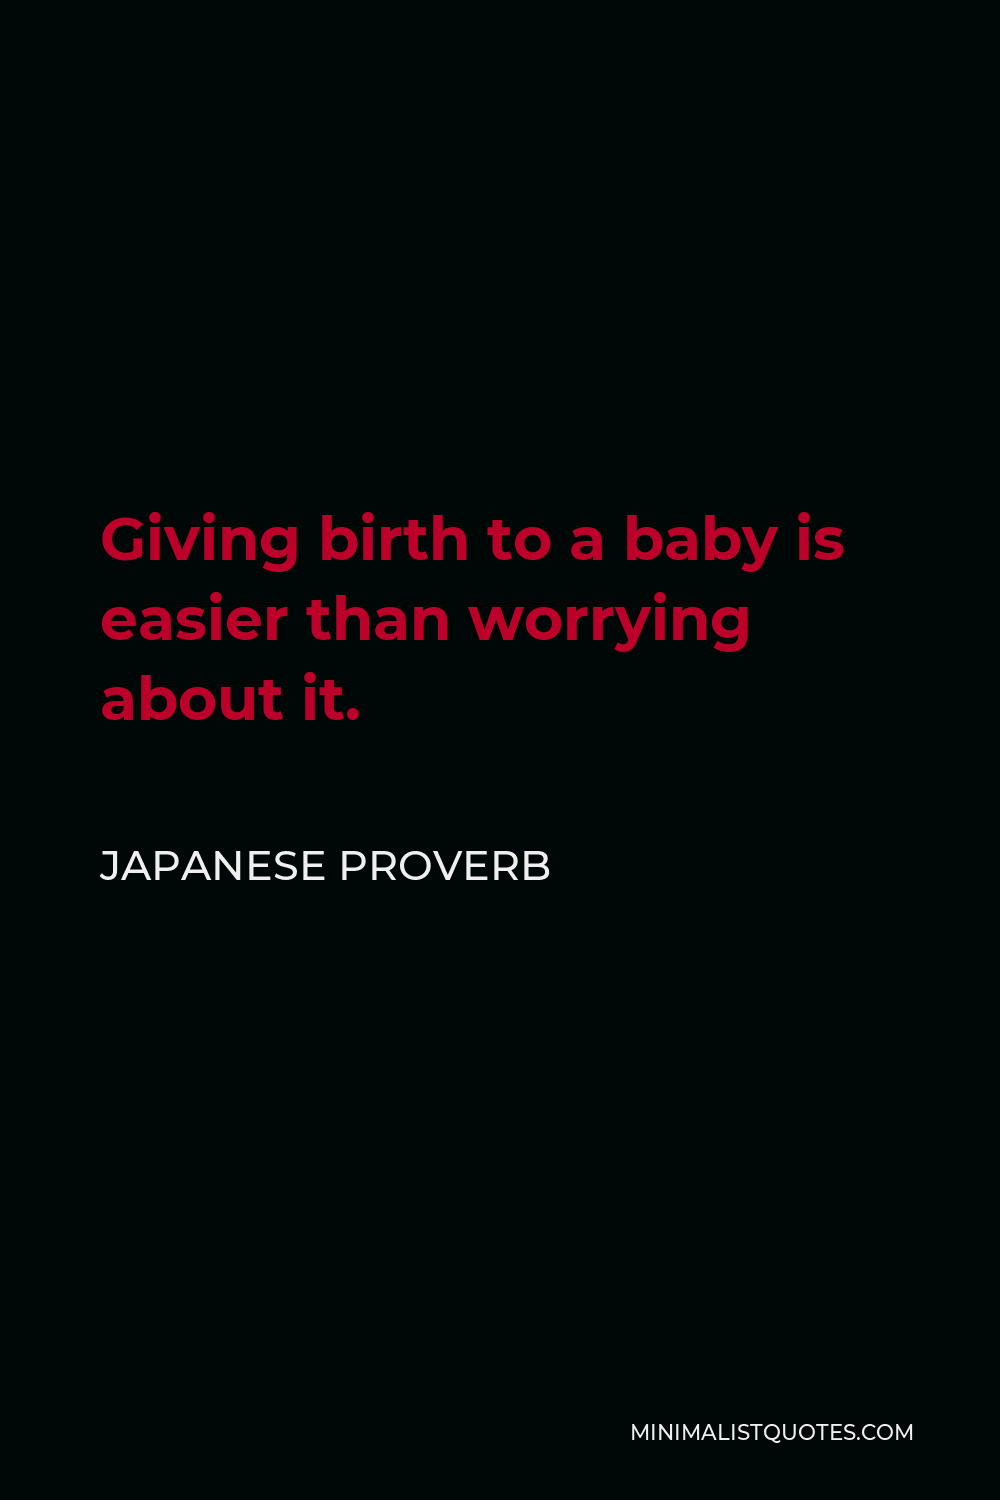 Japanese Proverb Quote - Giving birth to a baby is easier than worrying about it.